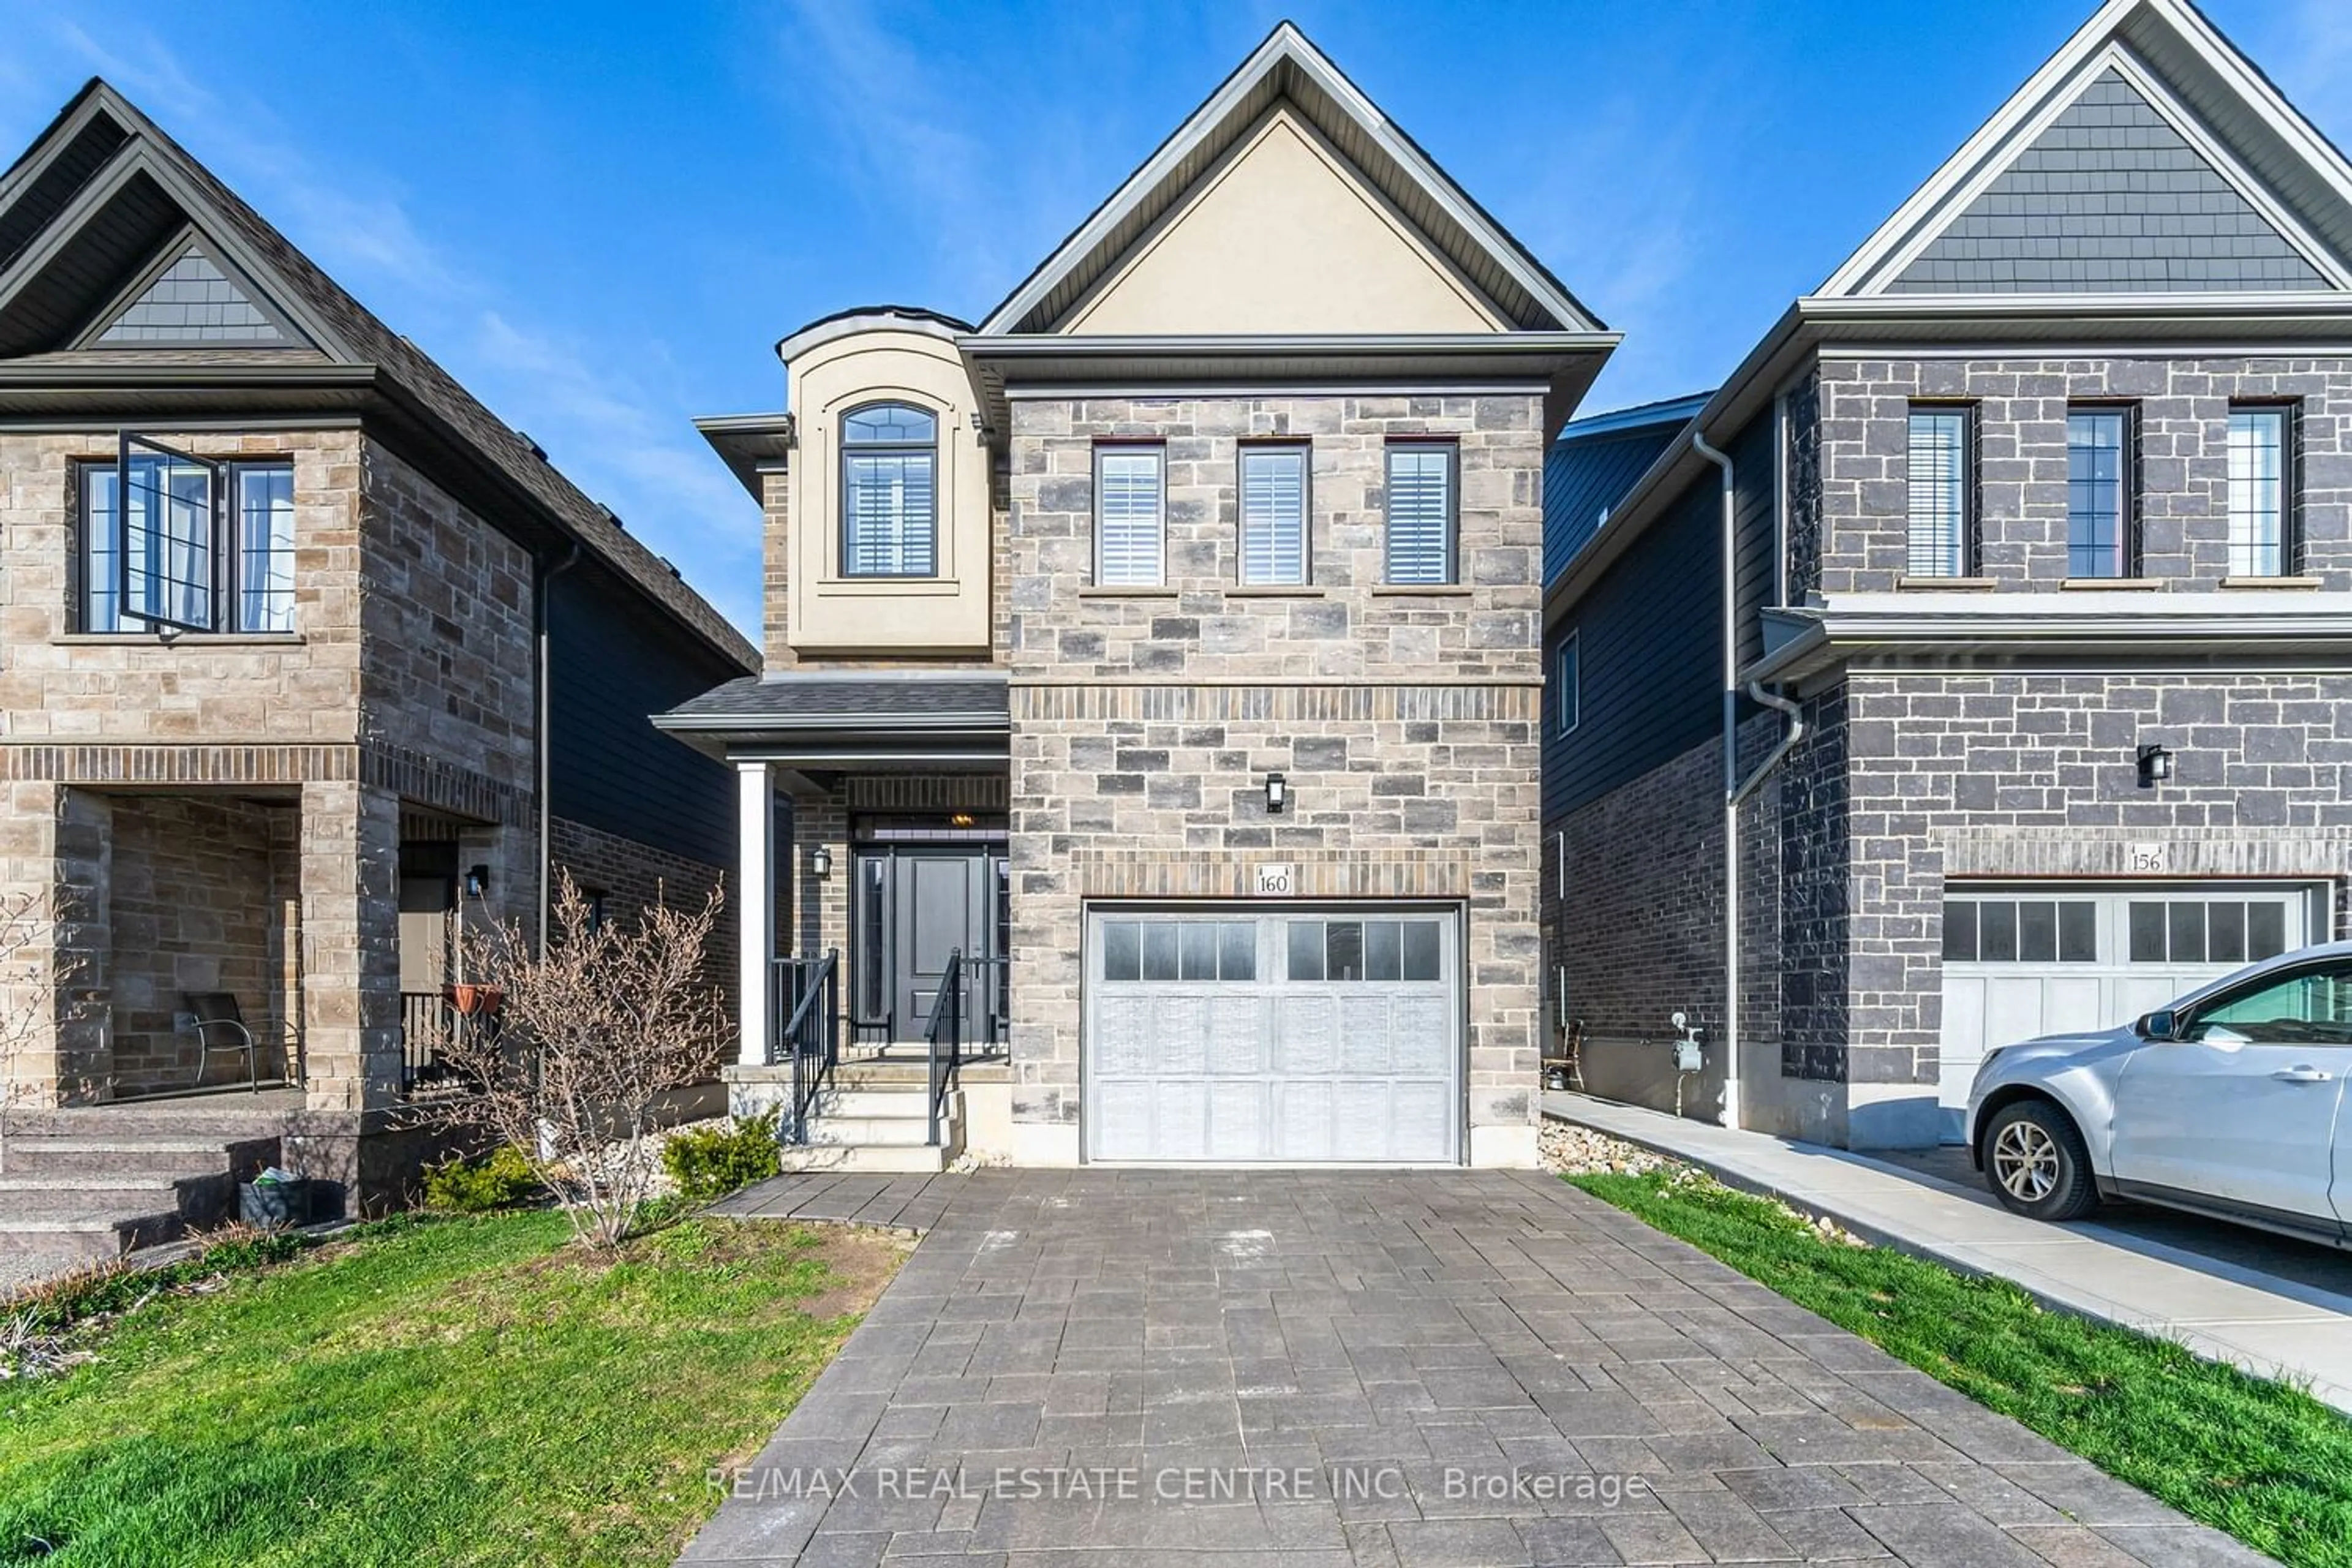 Home with brick exterior material for 160 Hollybrook Tr, Kitchener Ontario N2R 0M2